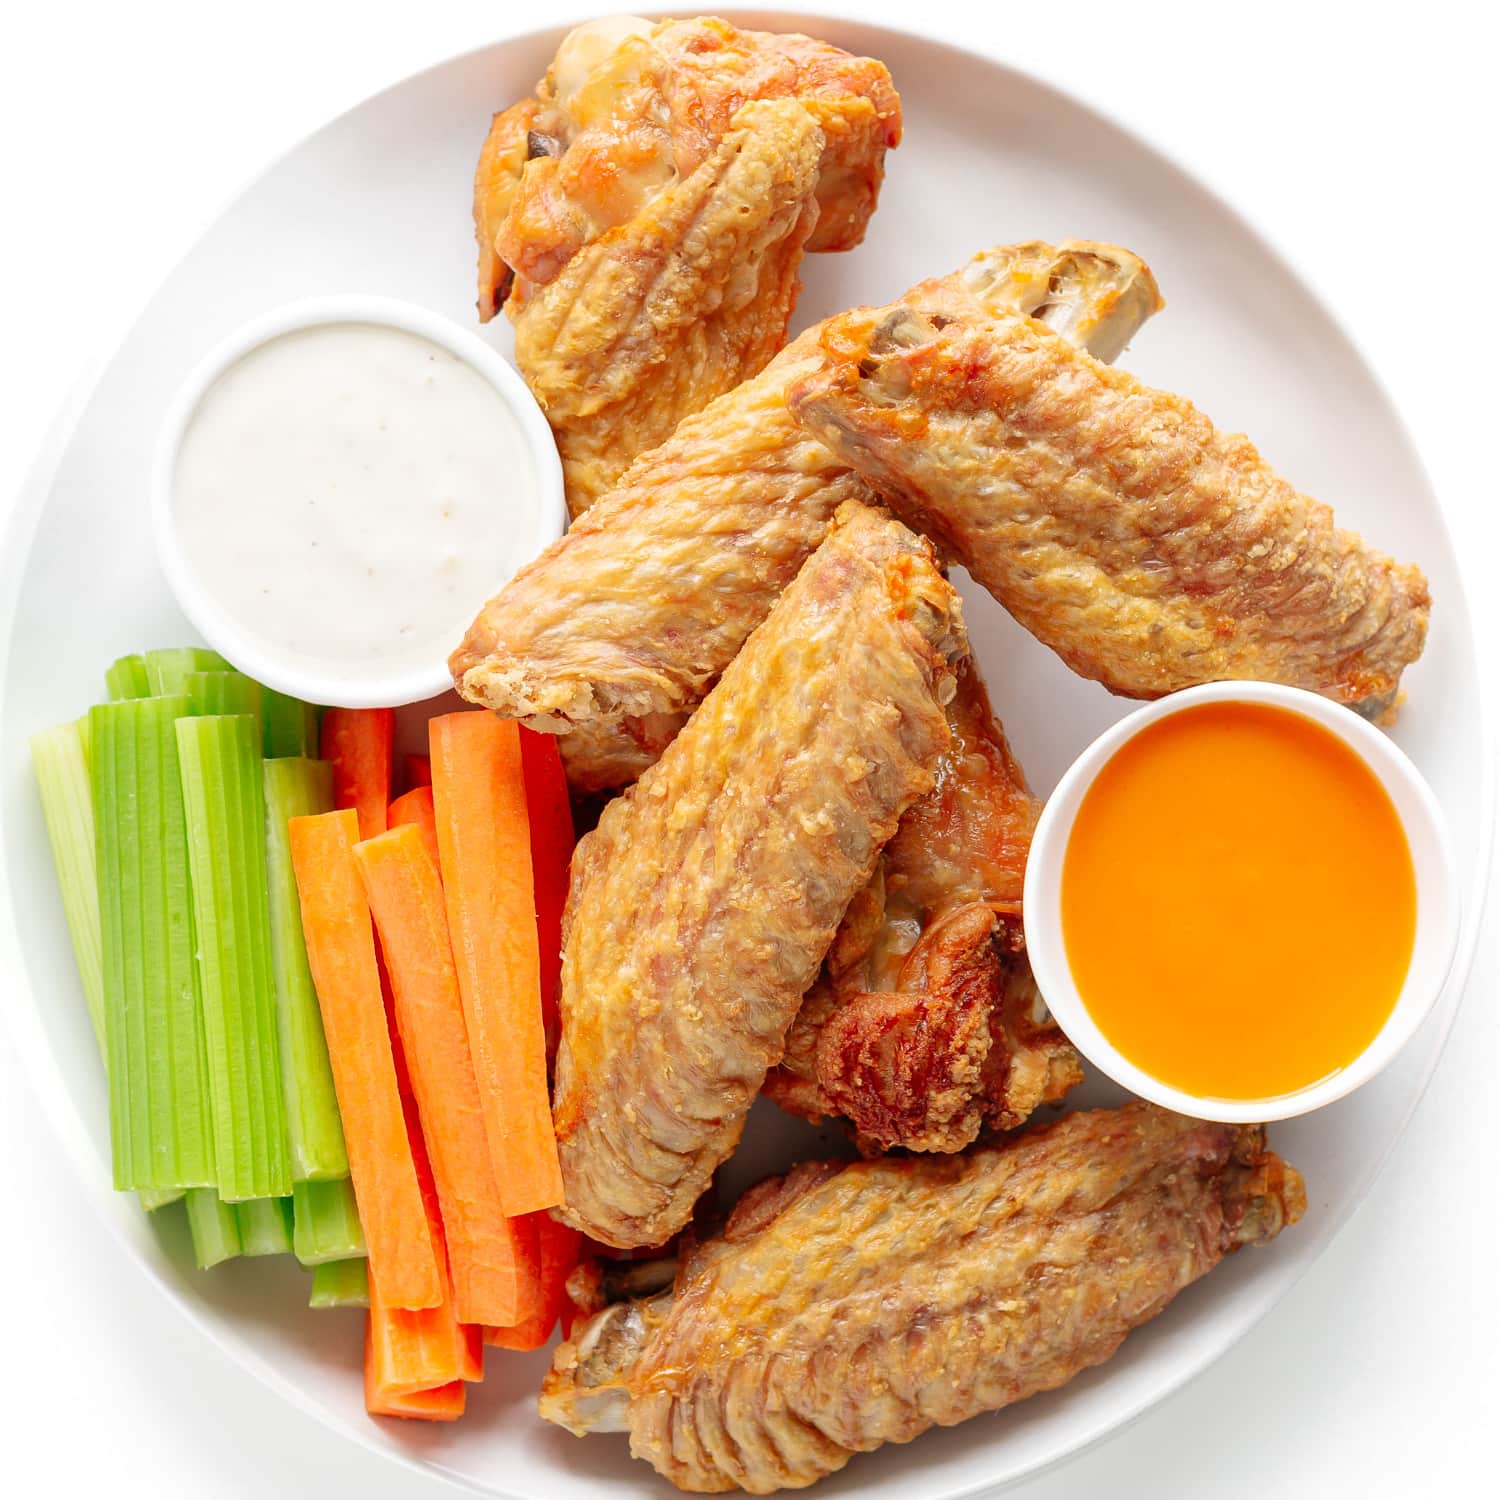 Baked turkey wings on a white plate with dipping sauces, carrot and celery sticks.